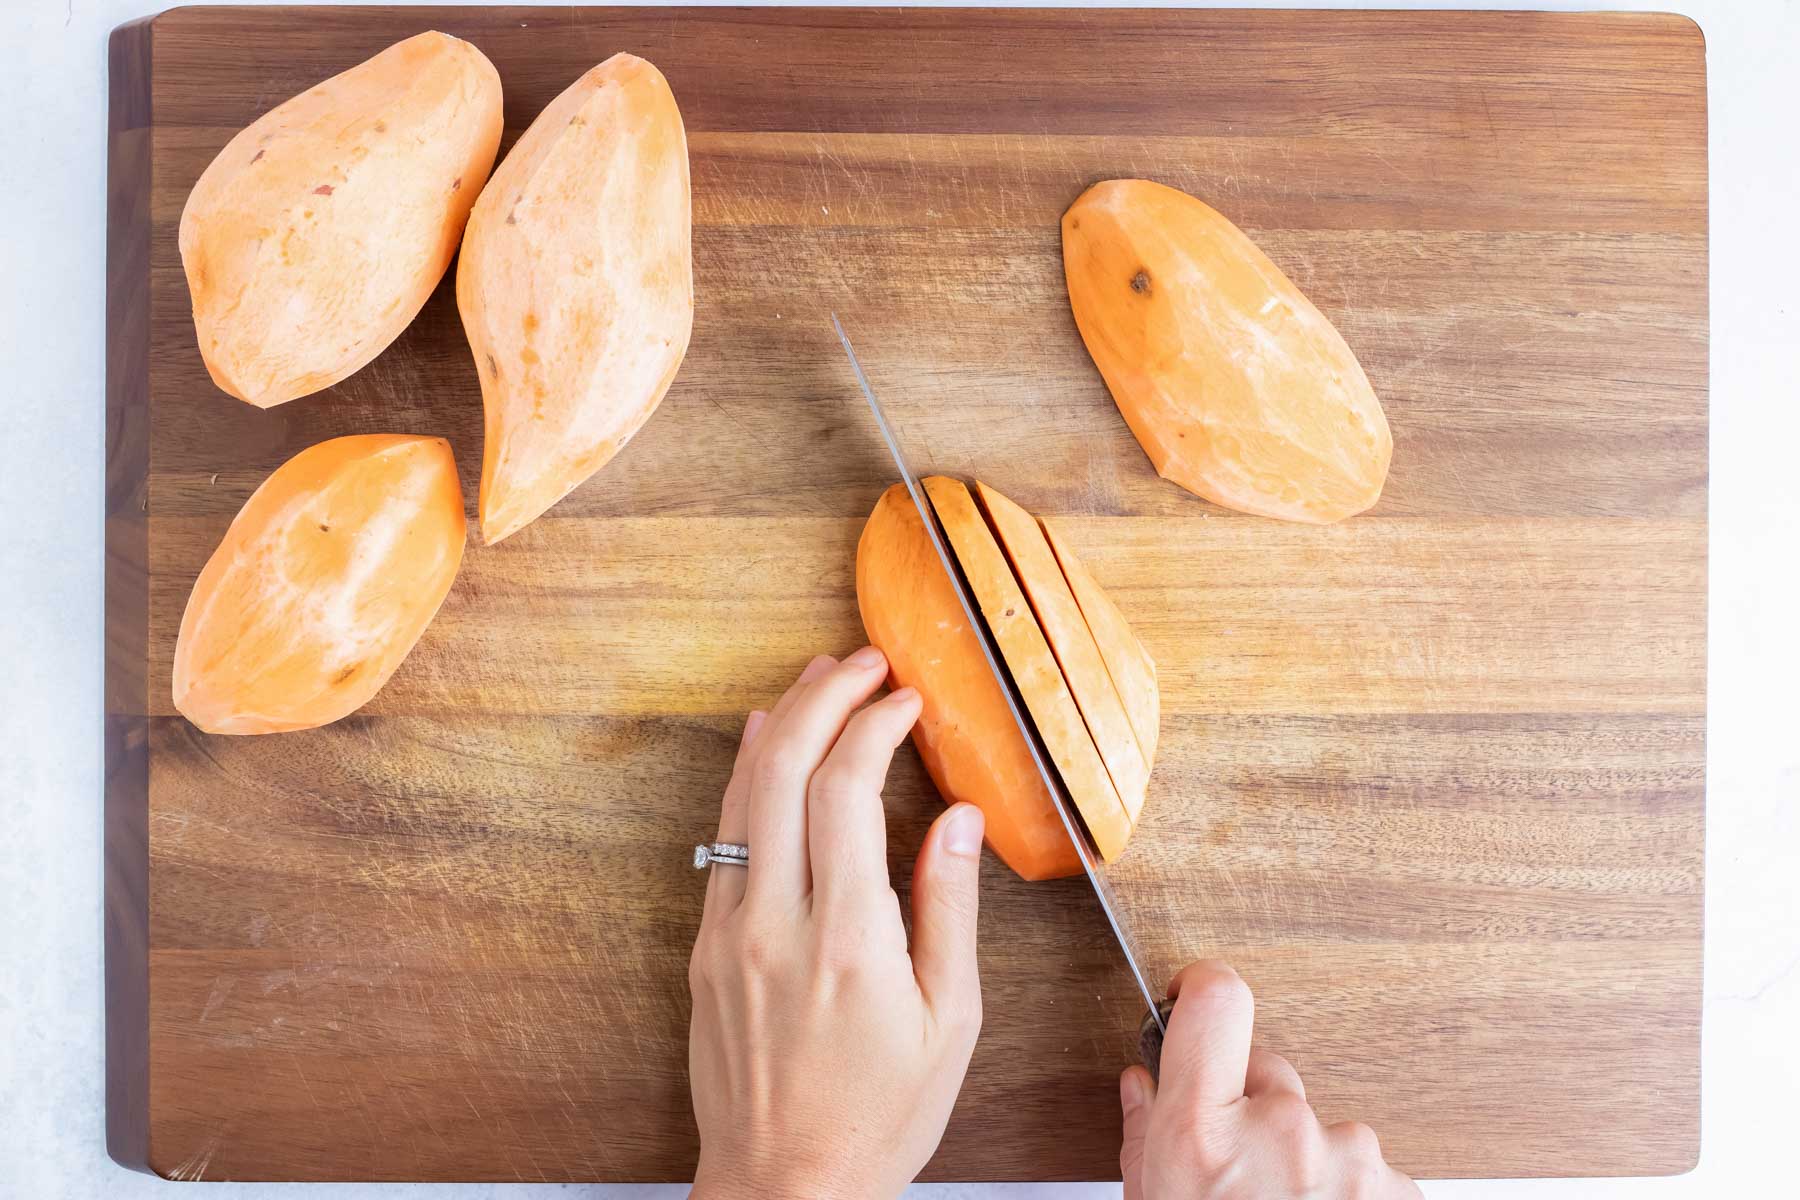 A sweet potato is cut with a knife into slices.